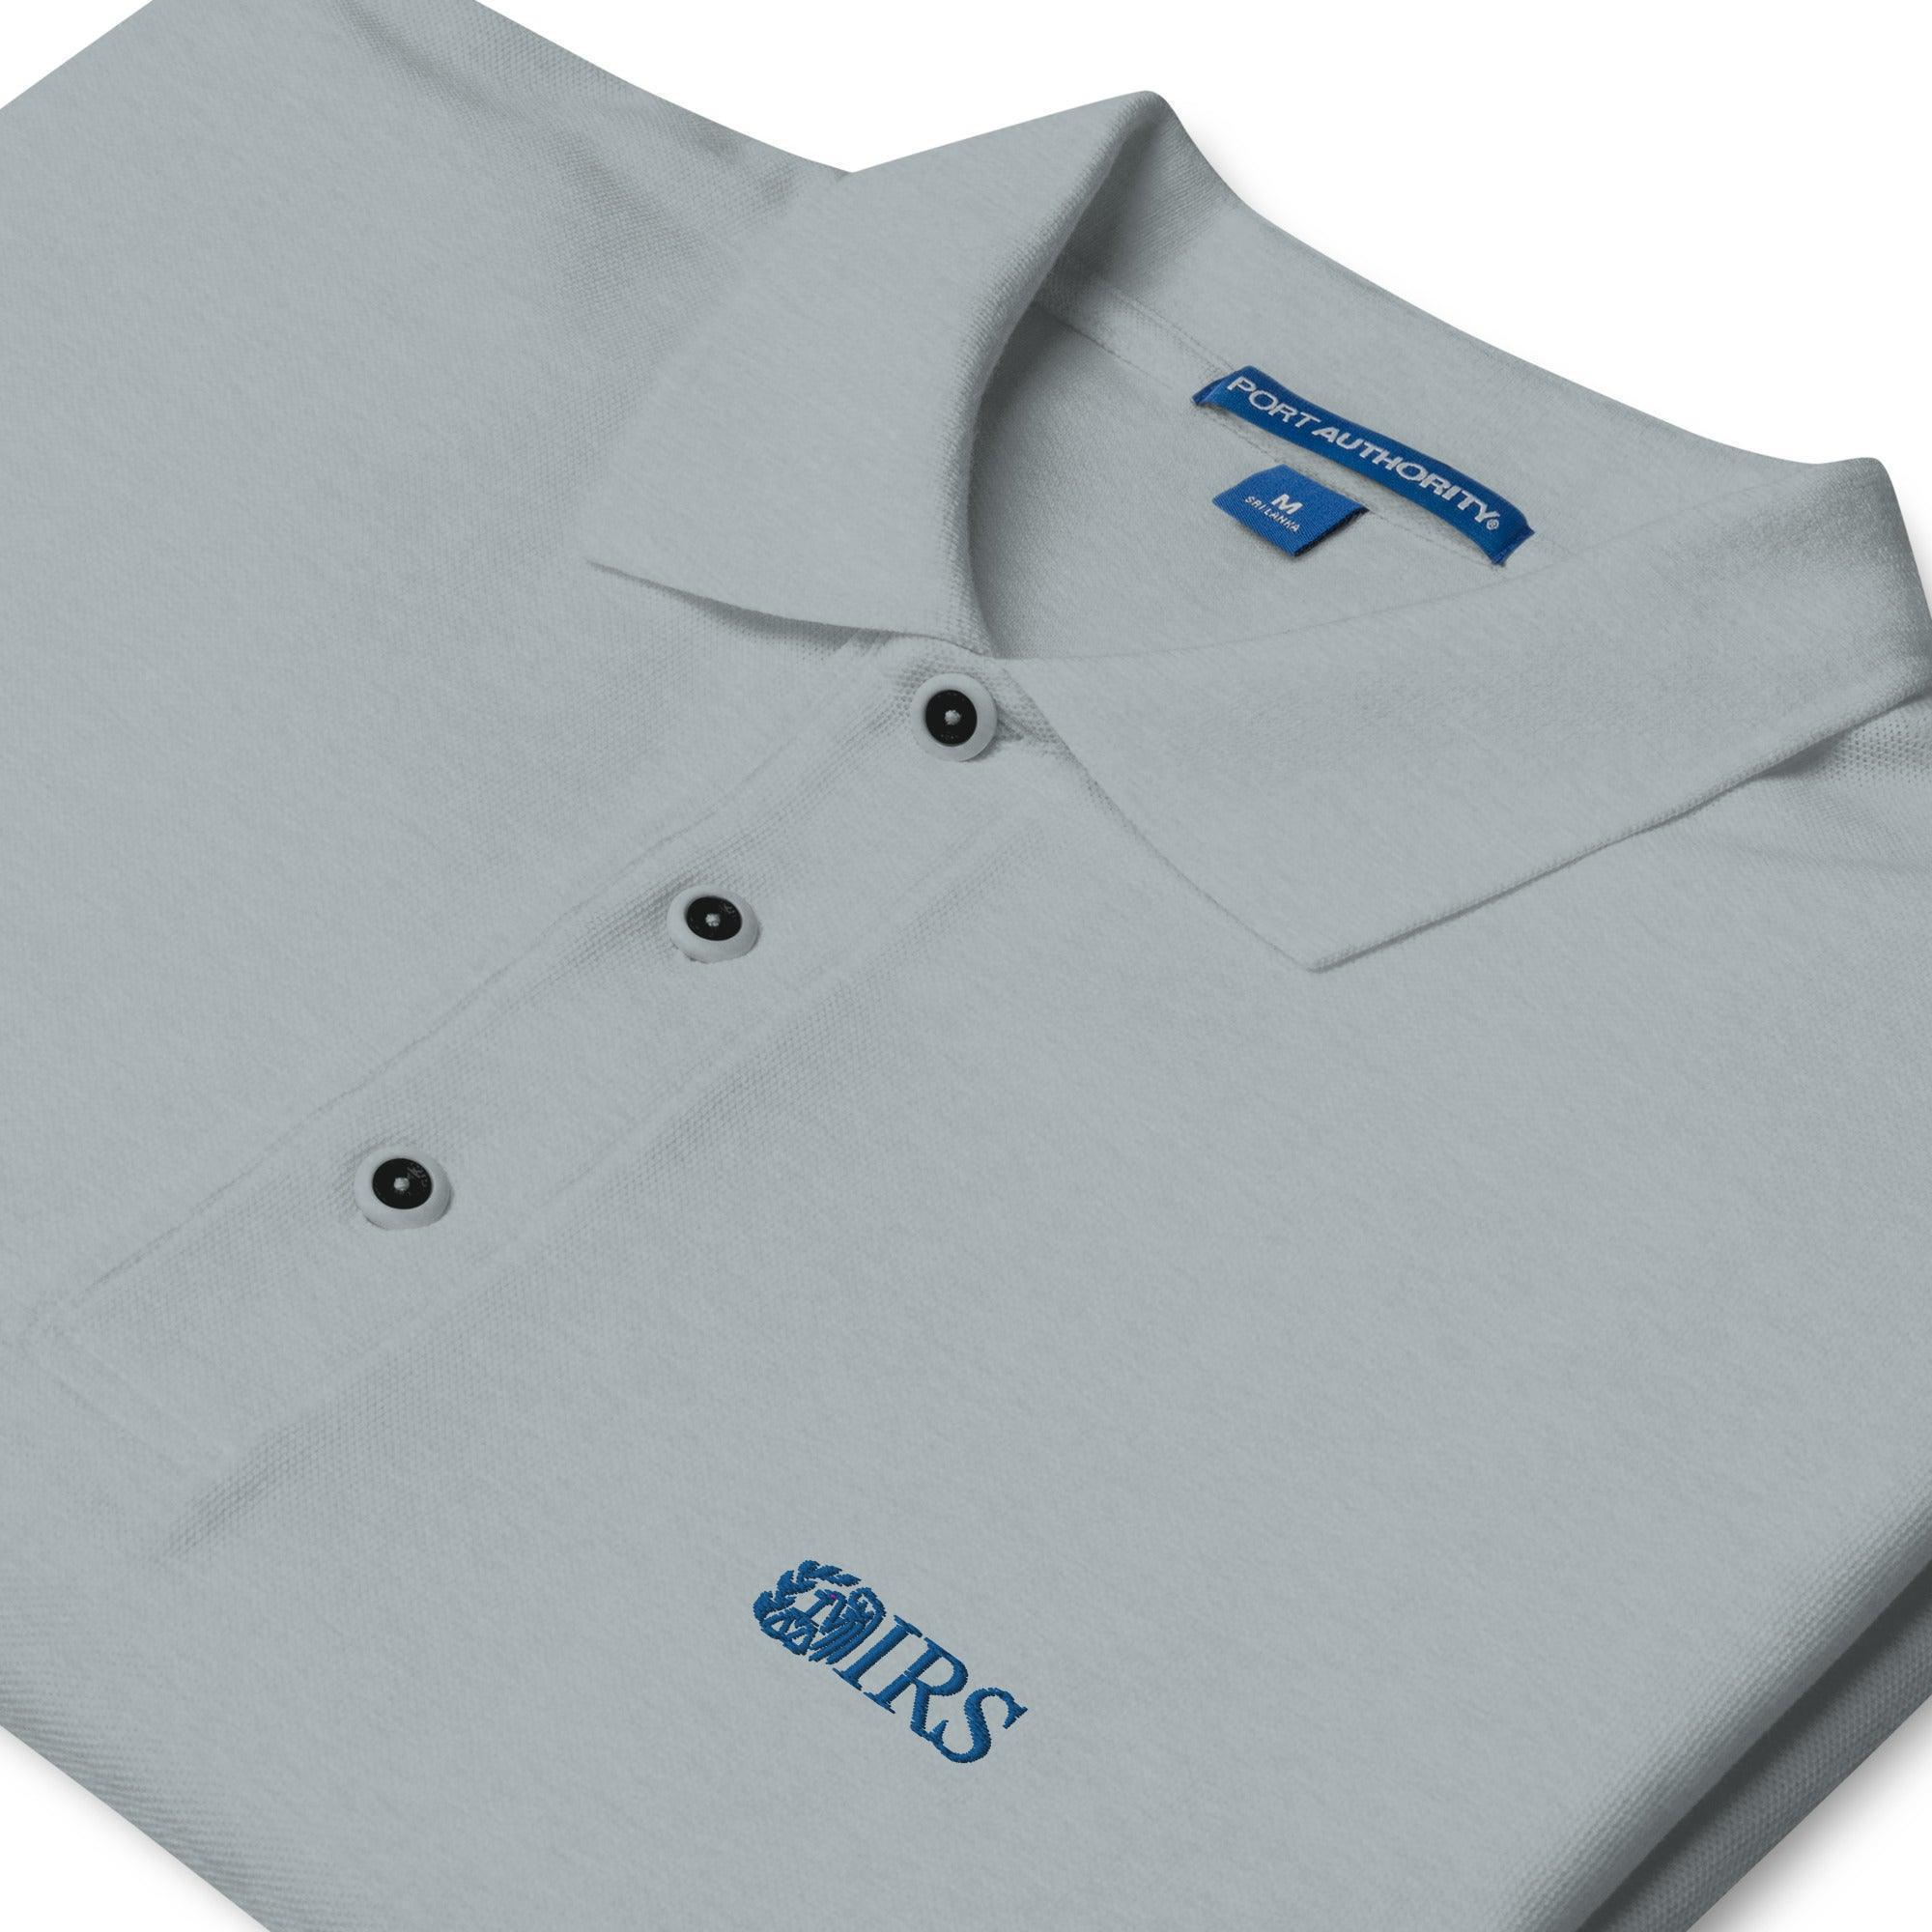 IRS Polo Shirt - InvestmenTees